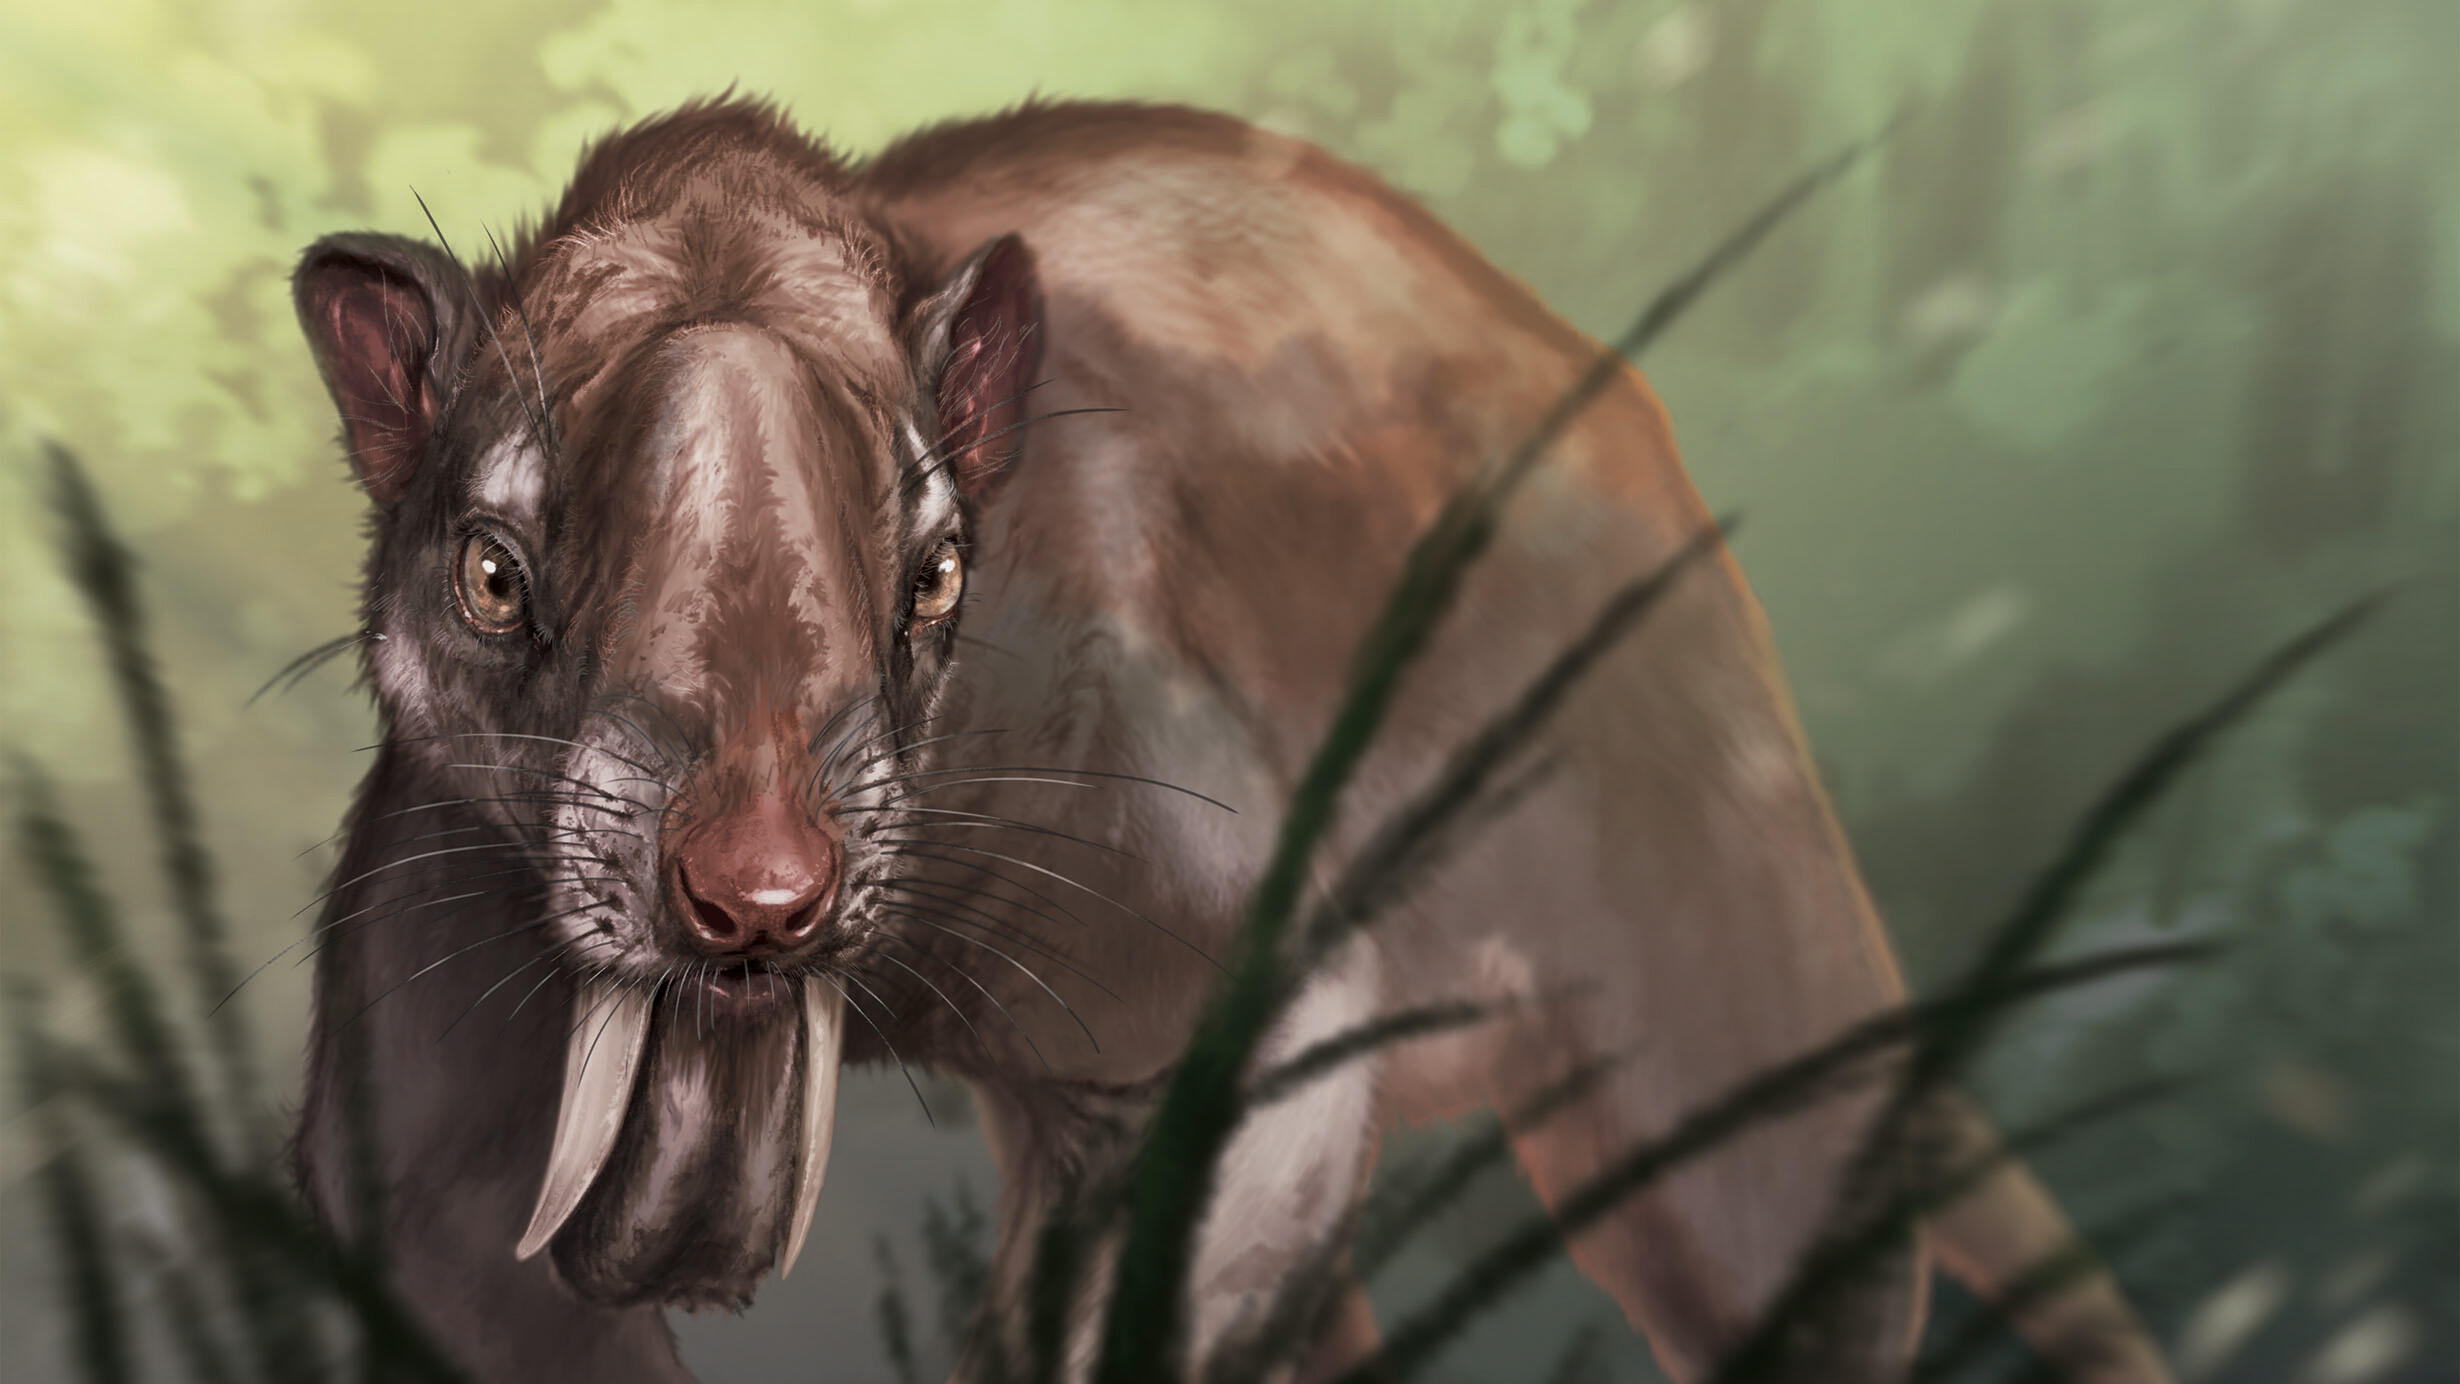 A visualization of the Thylacosmilus atrox, a marsupial sabertooth with two long, curved front teeth, standing among leaves.